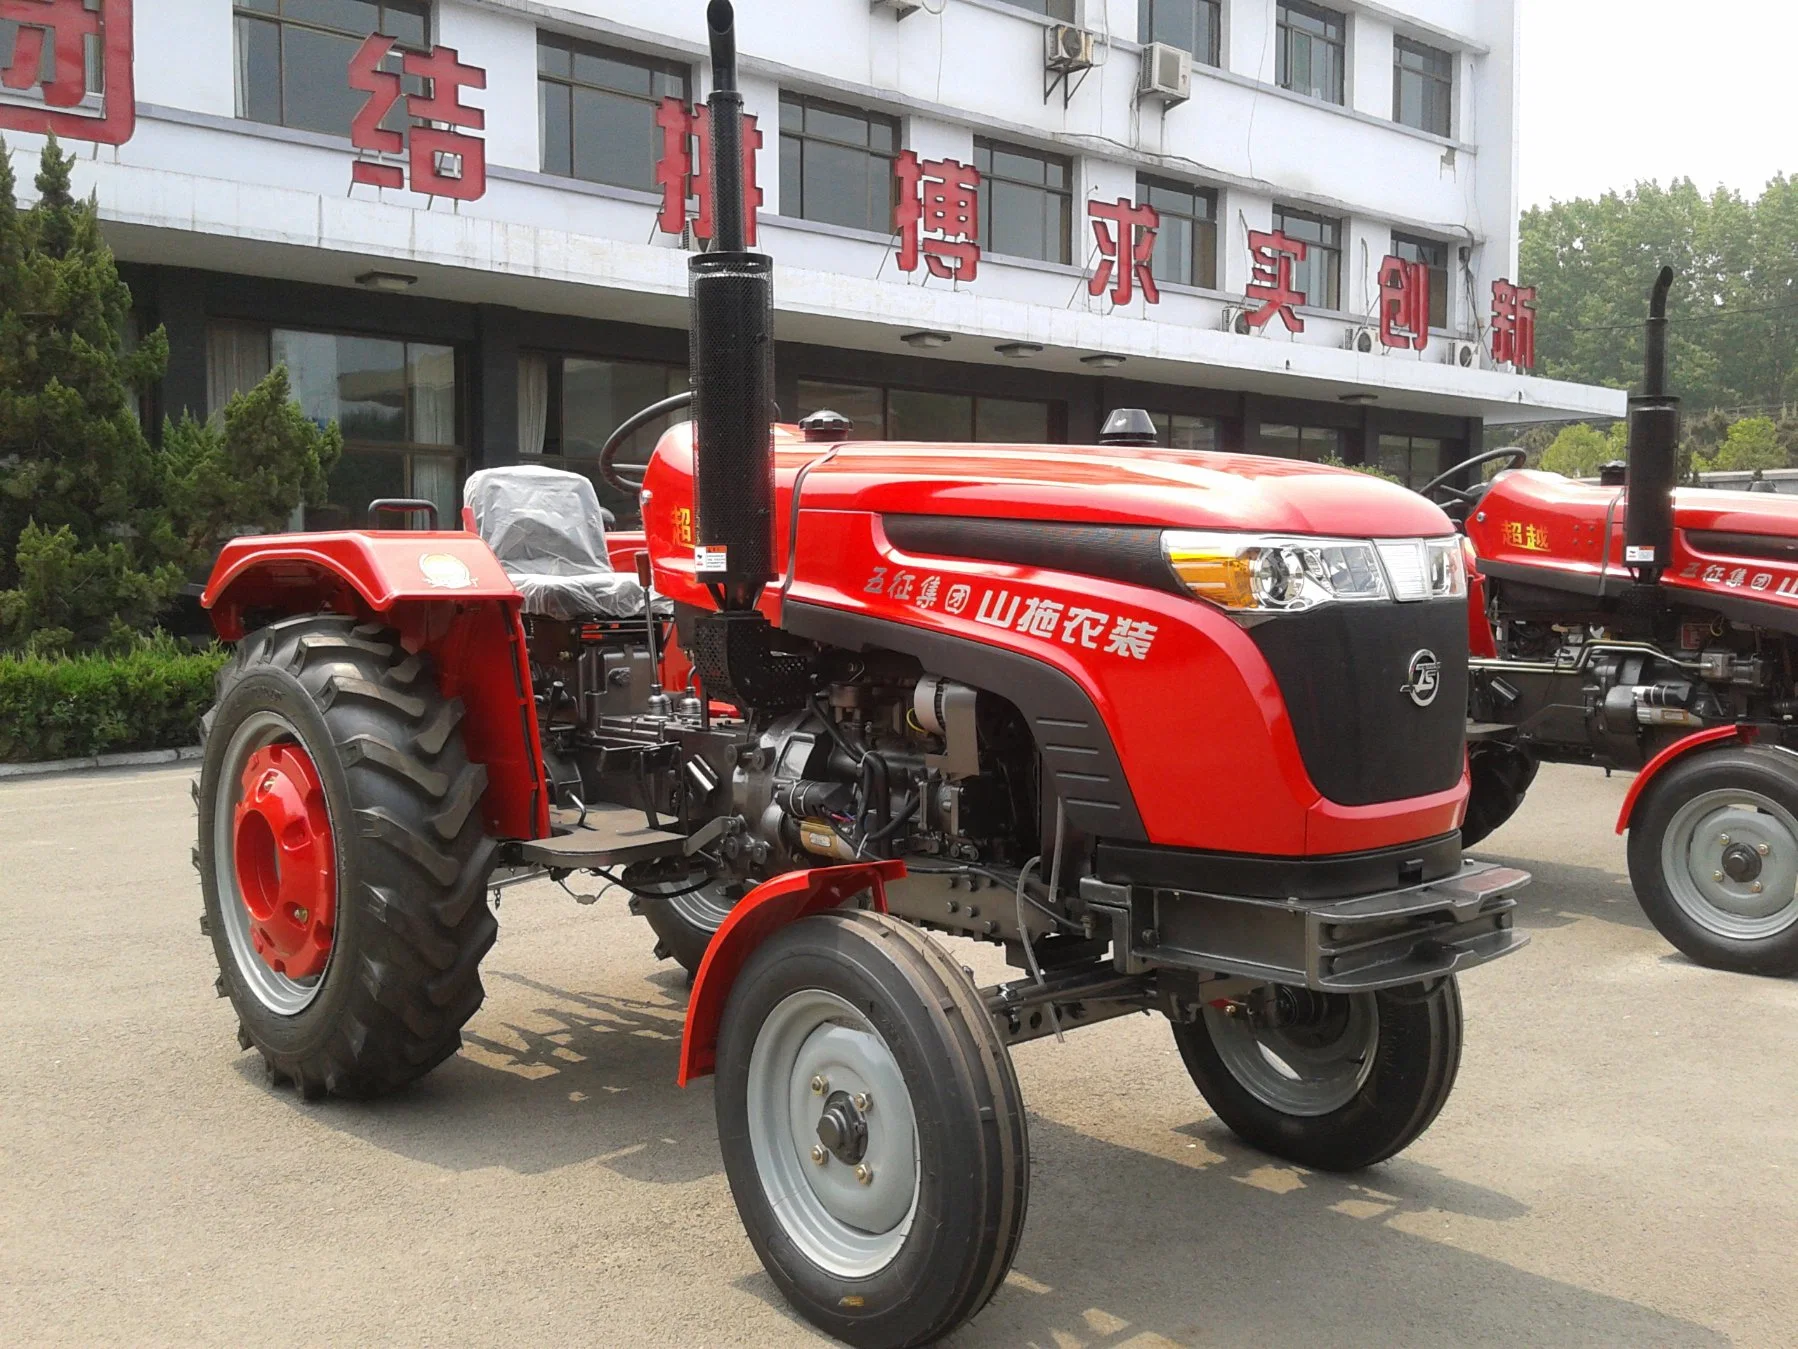 WUZHENG Practical and Professional Durable Farm Tractor Agricultural Machinery